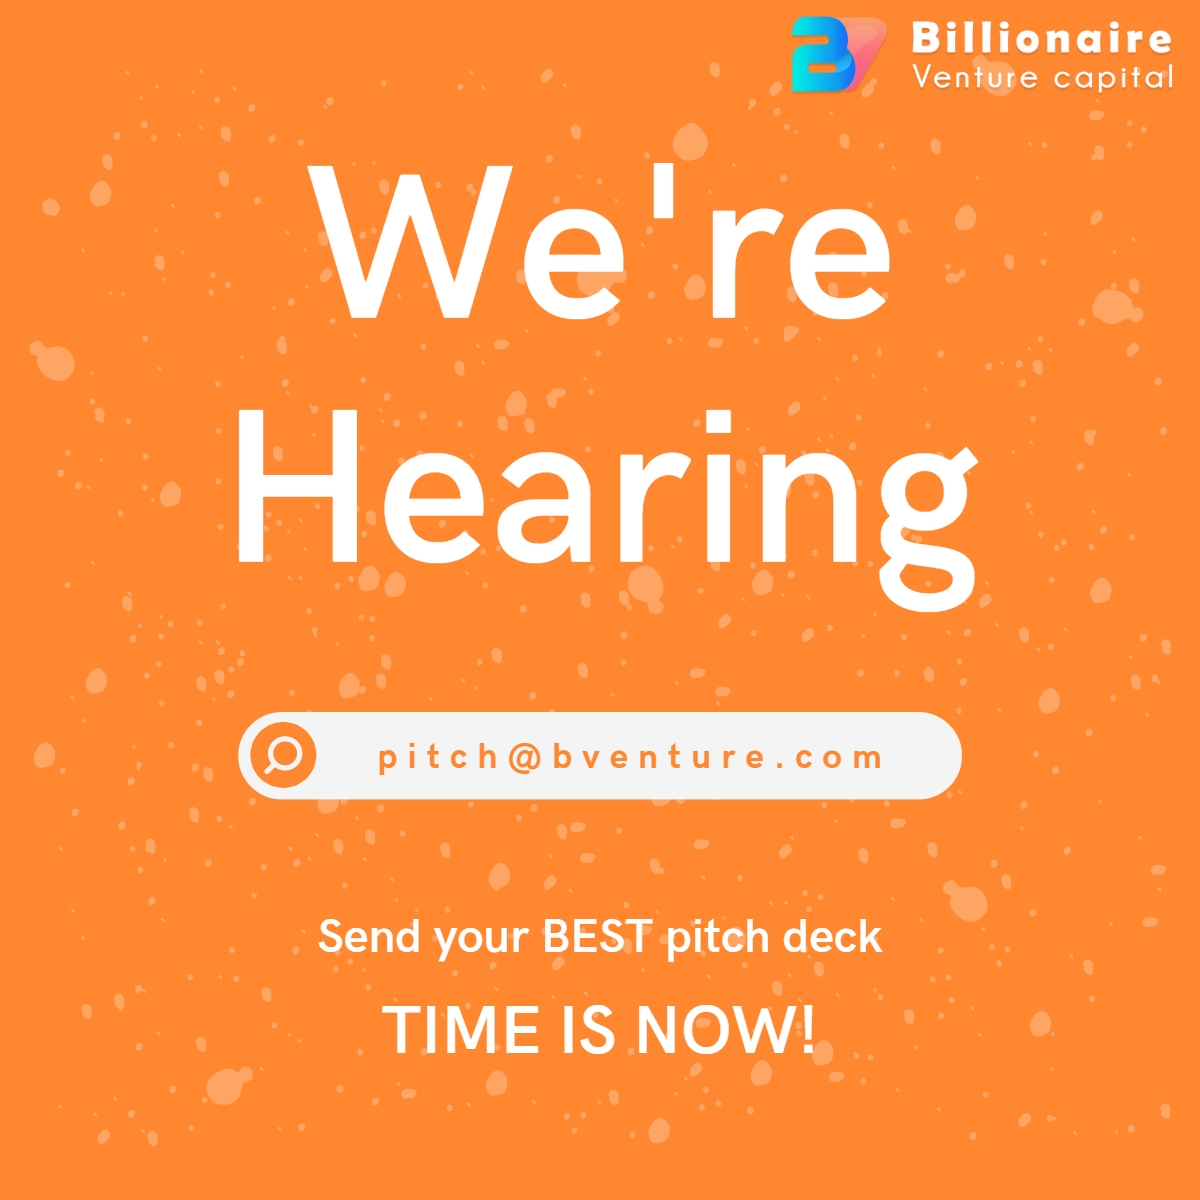 Don't miss your chance to pitch to Billionaire Venture Capital! We're looking for the best startups to join us and take their business to the next level. pitch@bventure.com

#VentureCapital #Startups #StartupPitching #VCFunding #AngelInvesting #TechInvesting #Fundinground